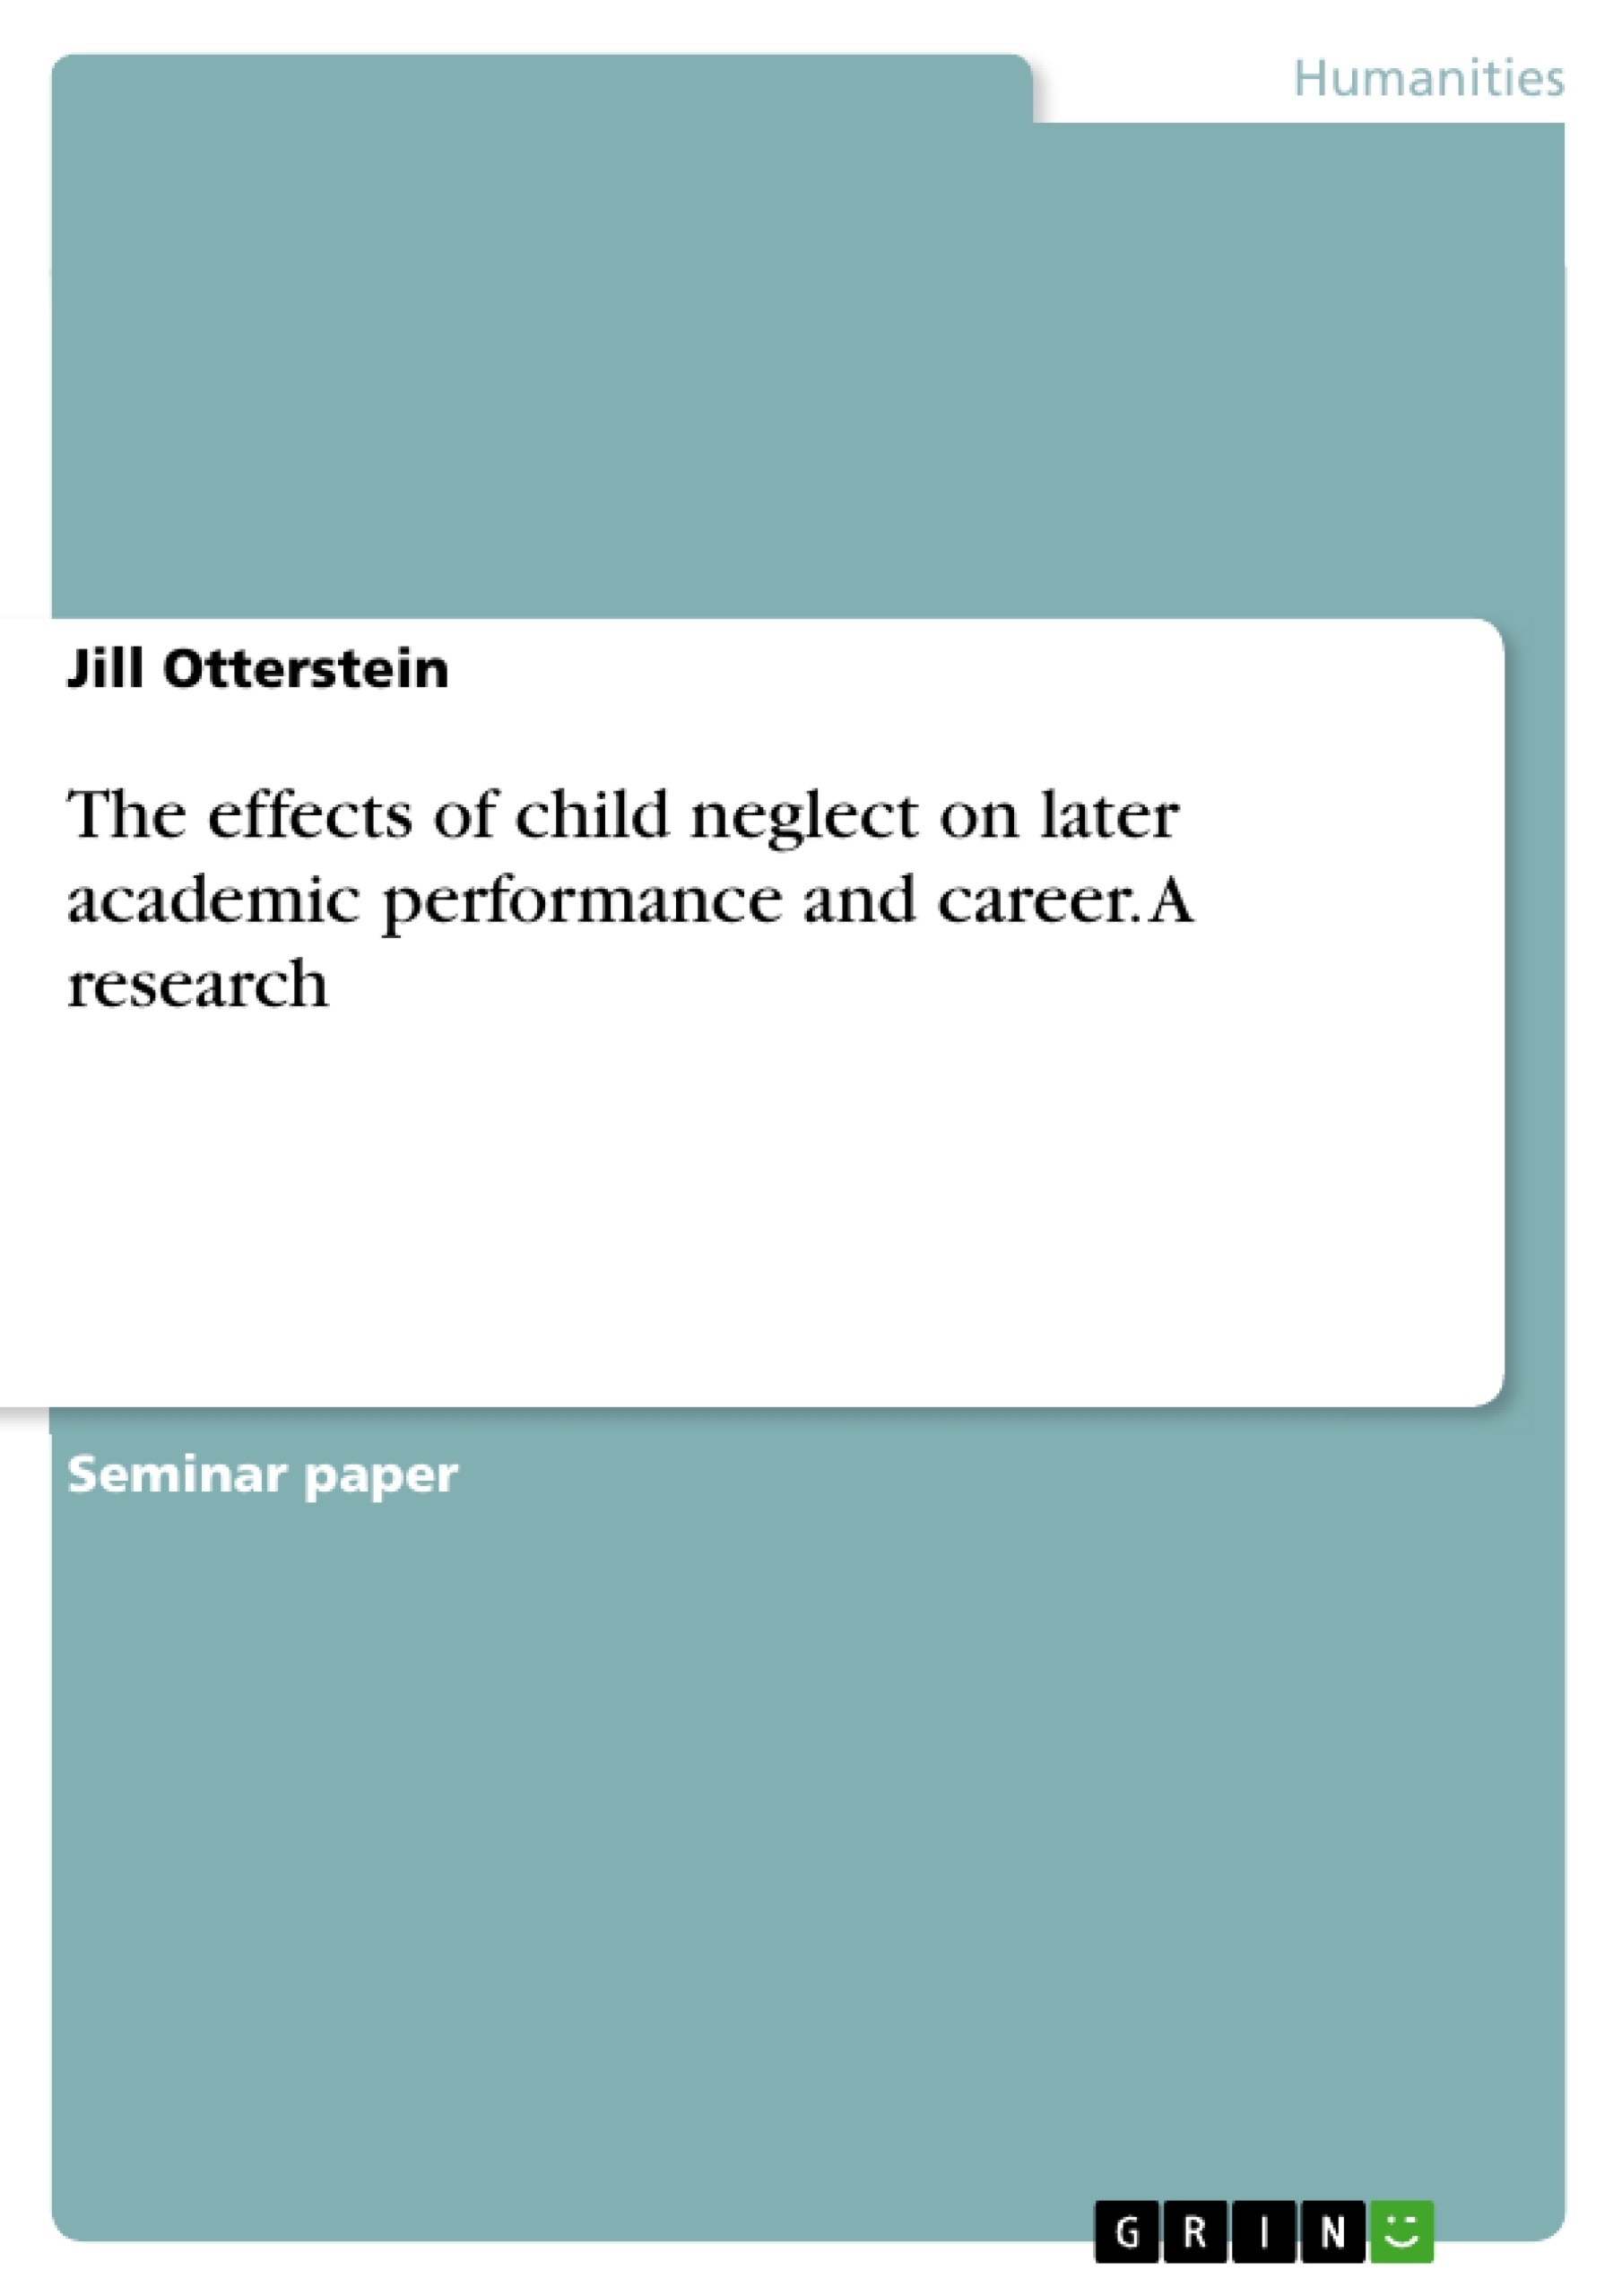 Titre: The effects of child neglect on later academic performance and career. A research